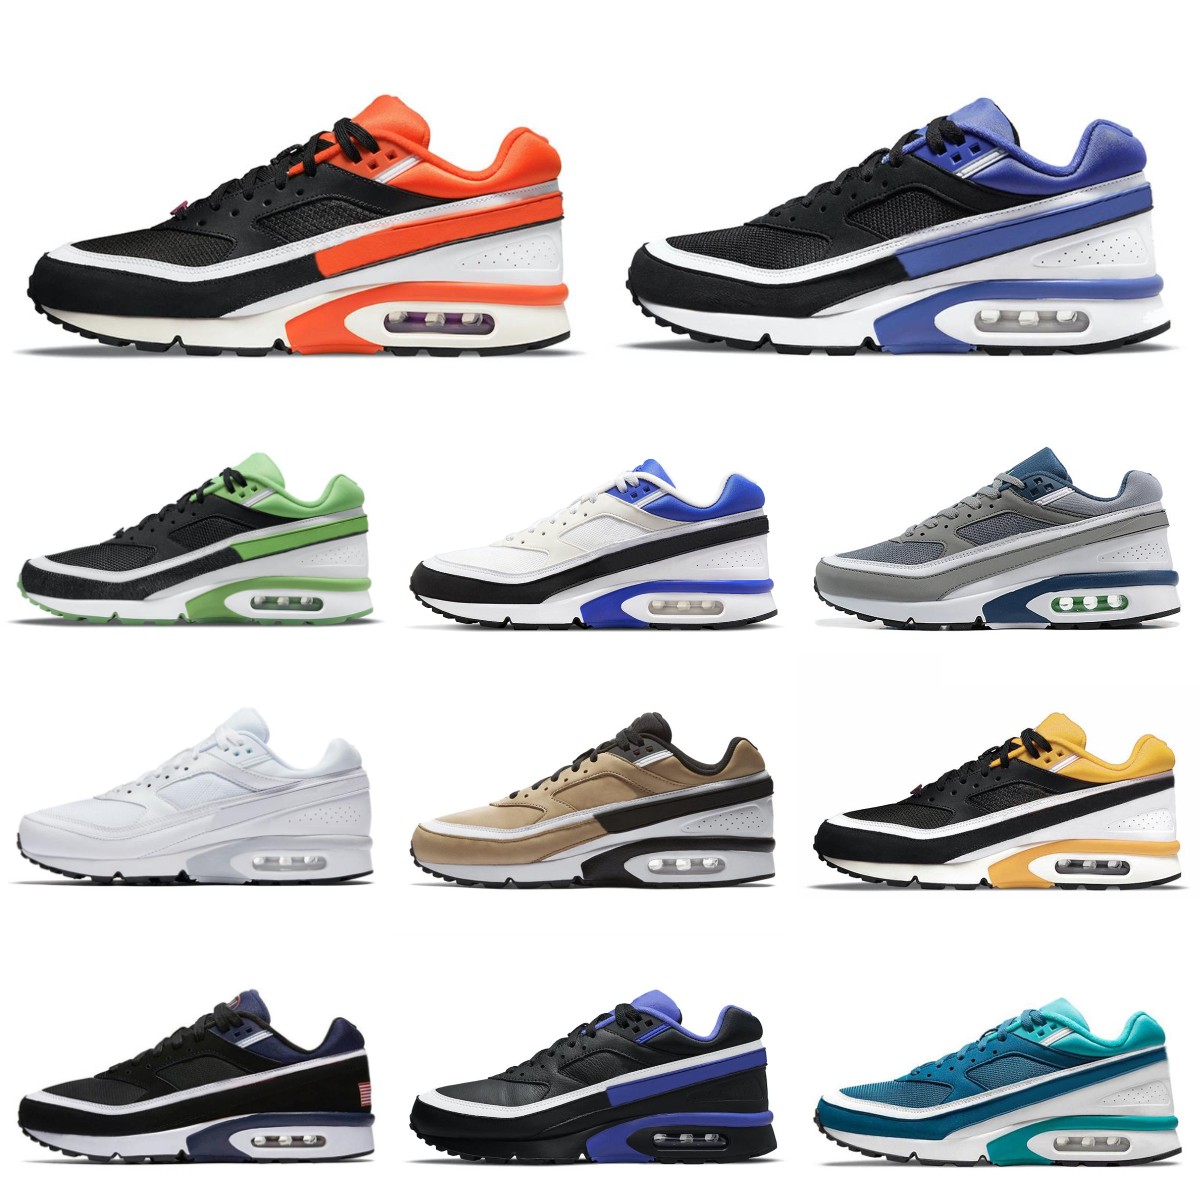 

2023 Mens Bw Sports Shoes Reverse White Persian Violet Red Trainers Airs Women Grey Neon Marina Light Stone Milk Jade Rotterdam Lyon Trainer Designer Sneakers S88, Please contact us